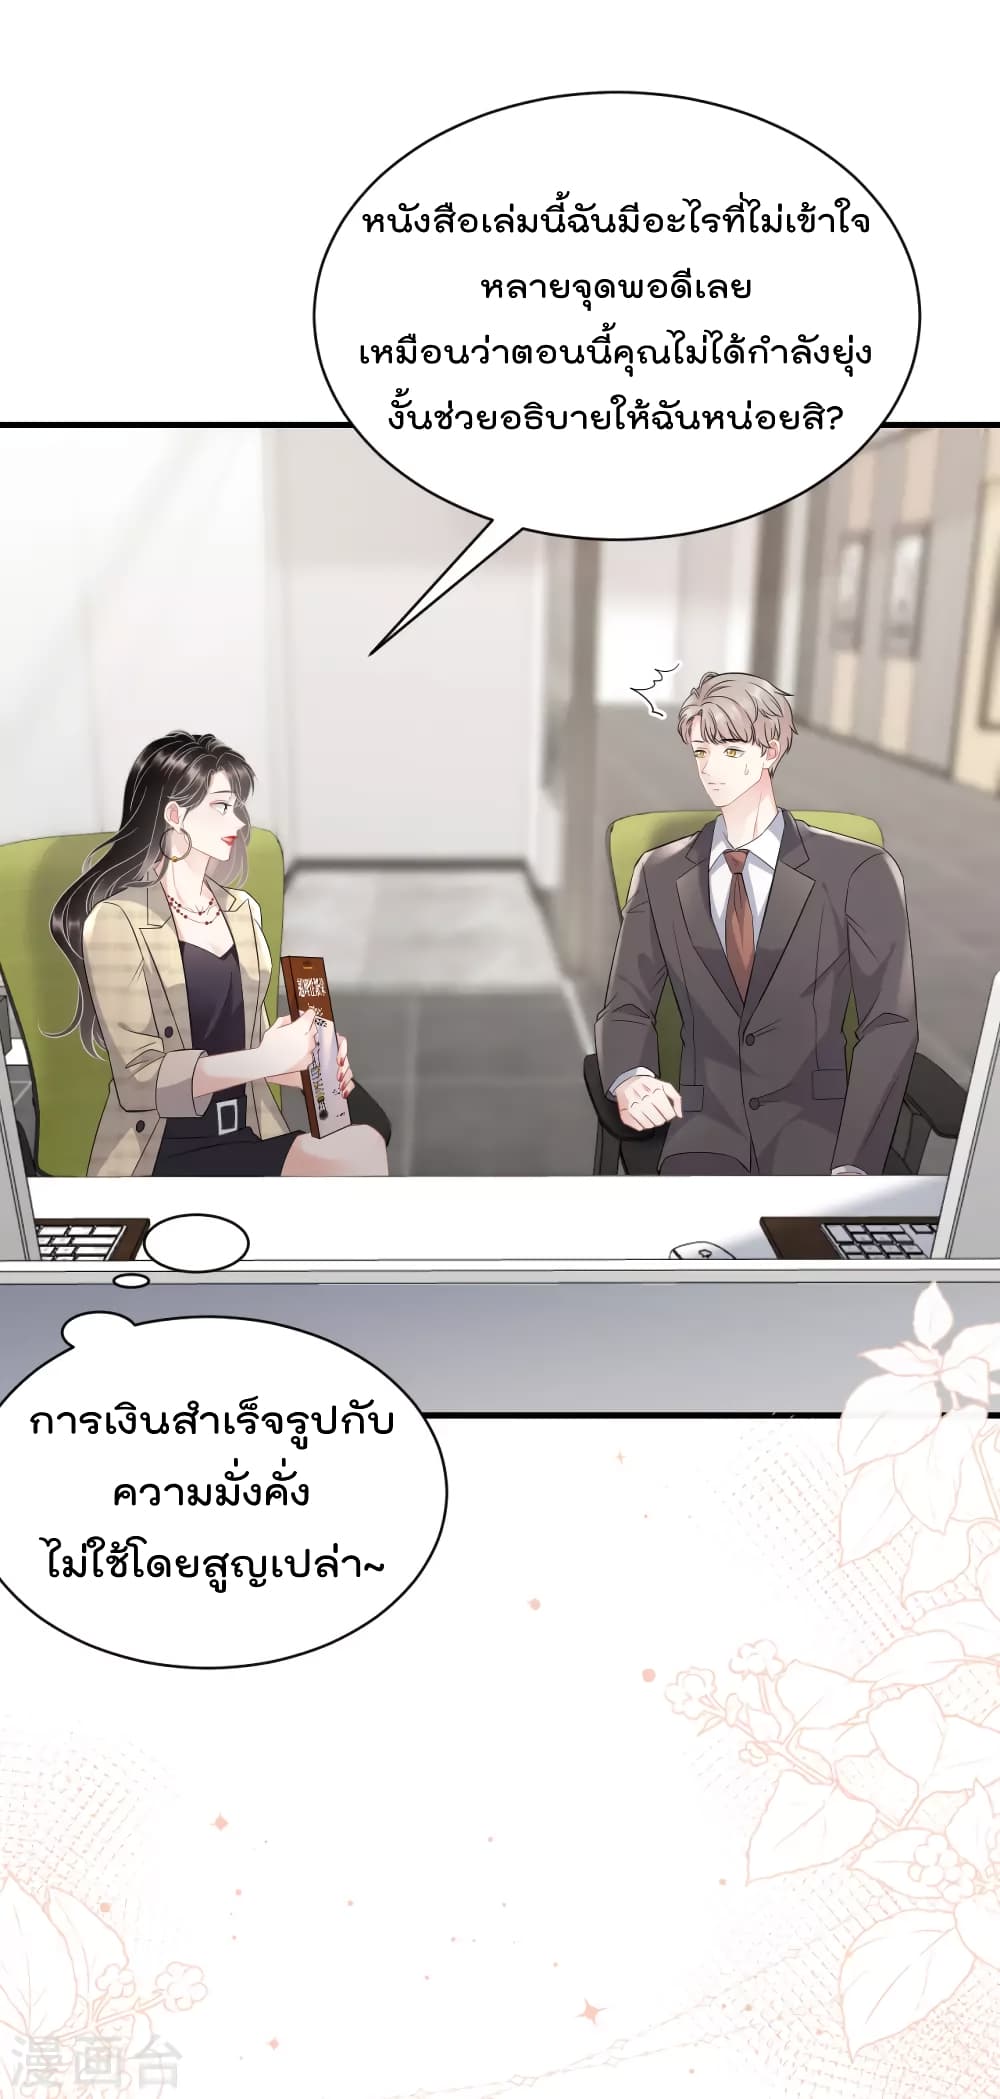 What Can the Eldest Lady Have คุณหนูใหญ่ ทำไมคุณร้ายอย่างนี้ 35-35